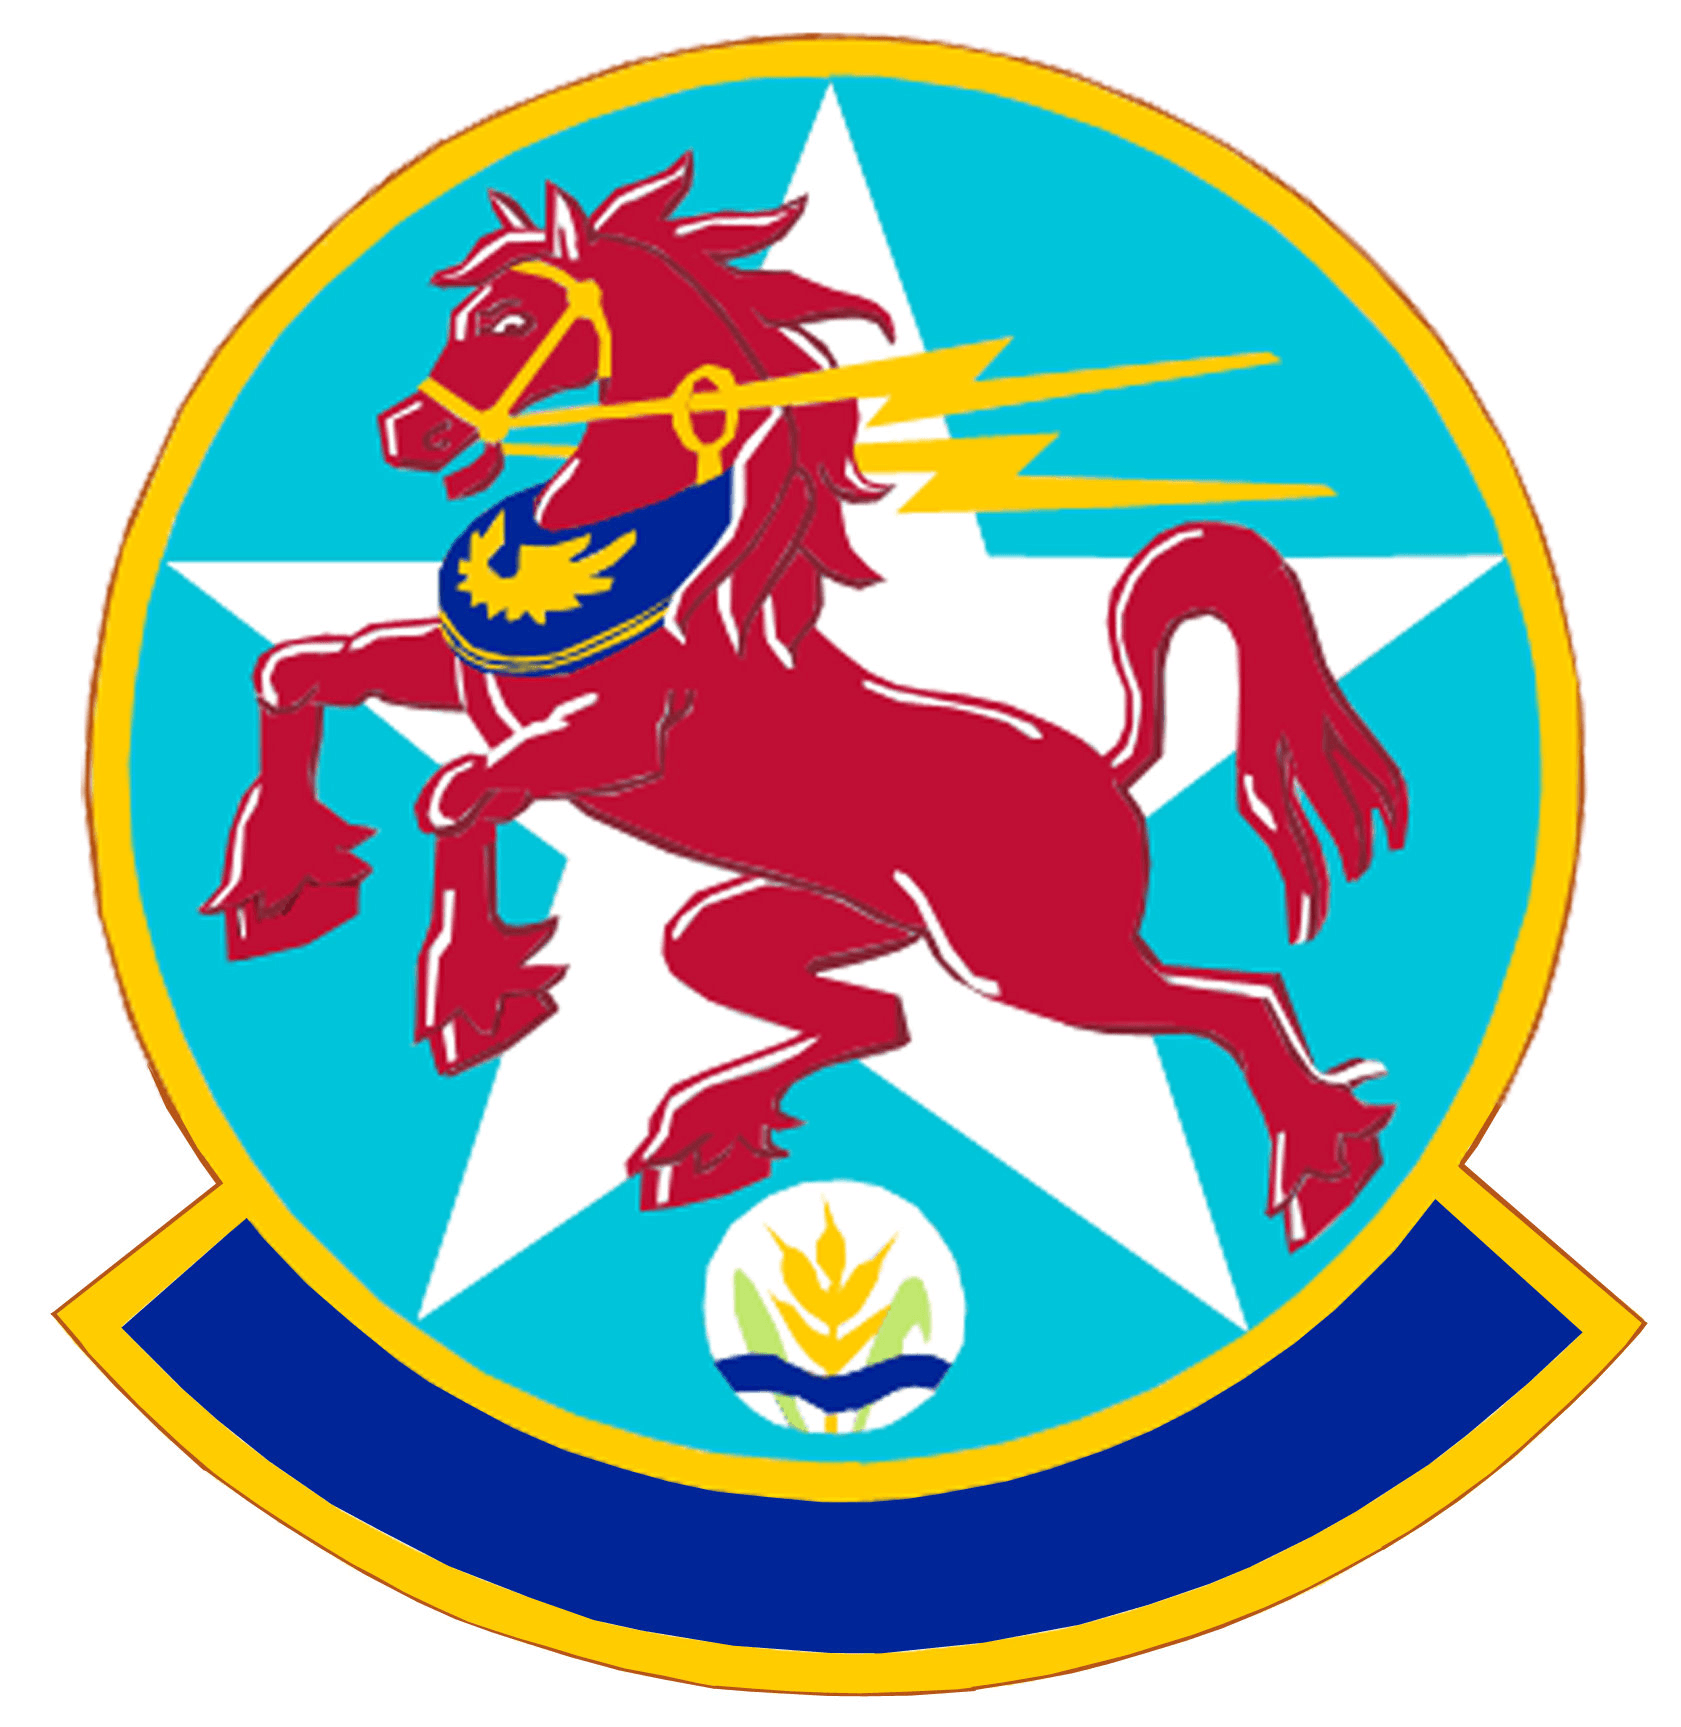 820th Red Horse Logo - File:820 RED HORSE Sq emblem.png - Wikimedia Commons